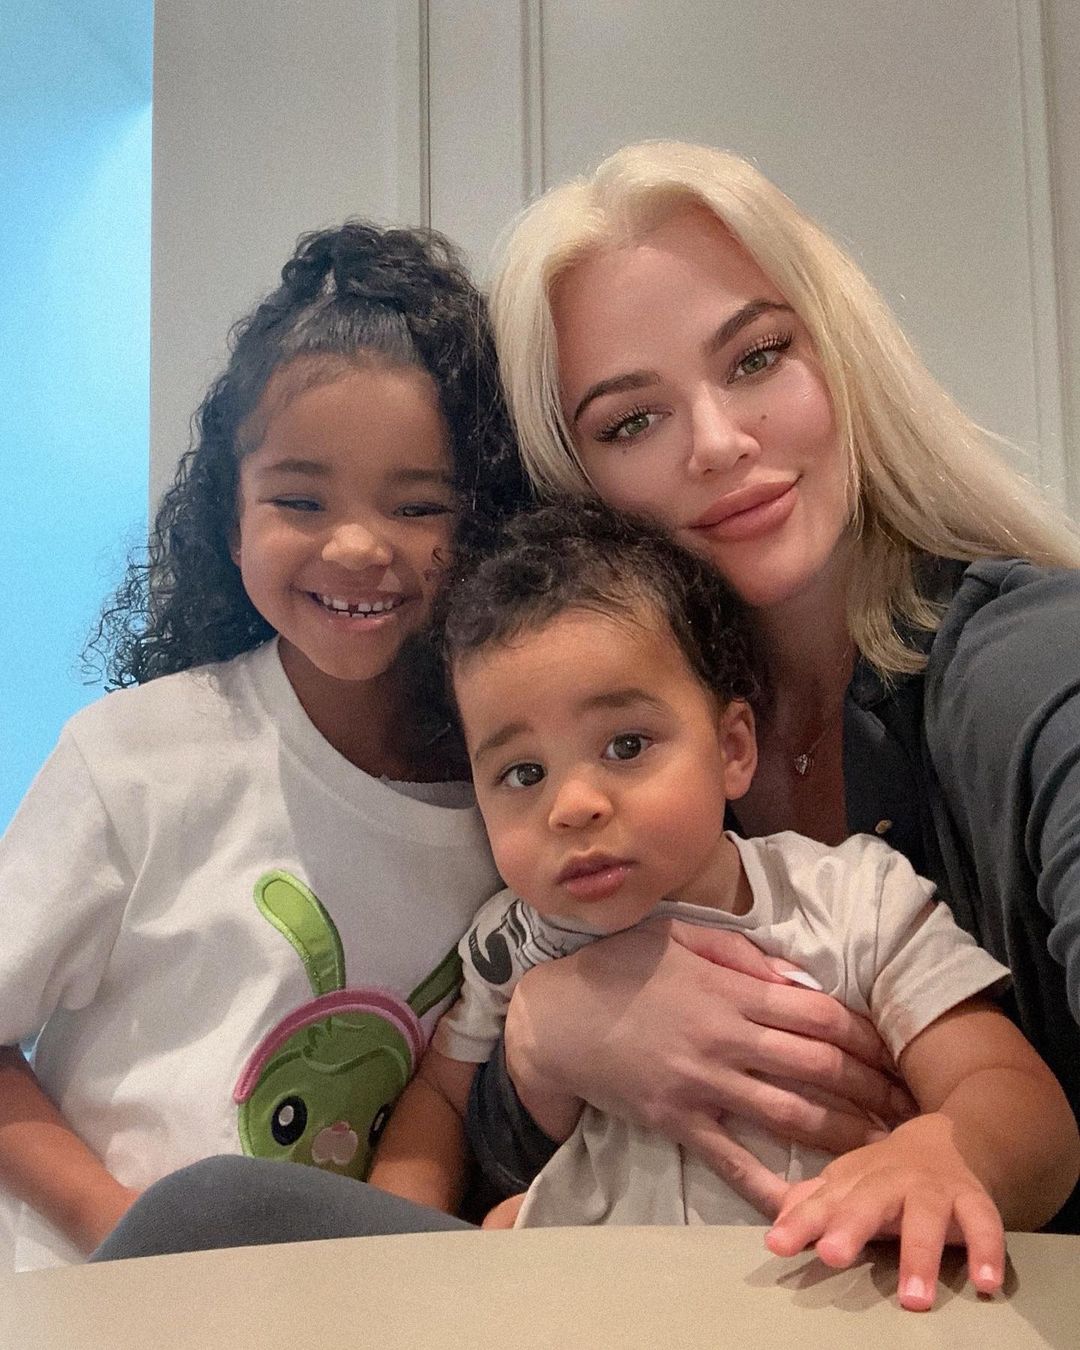 Khloe pictured with her kids True and Tate Thompson